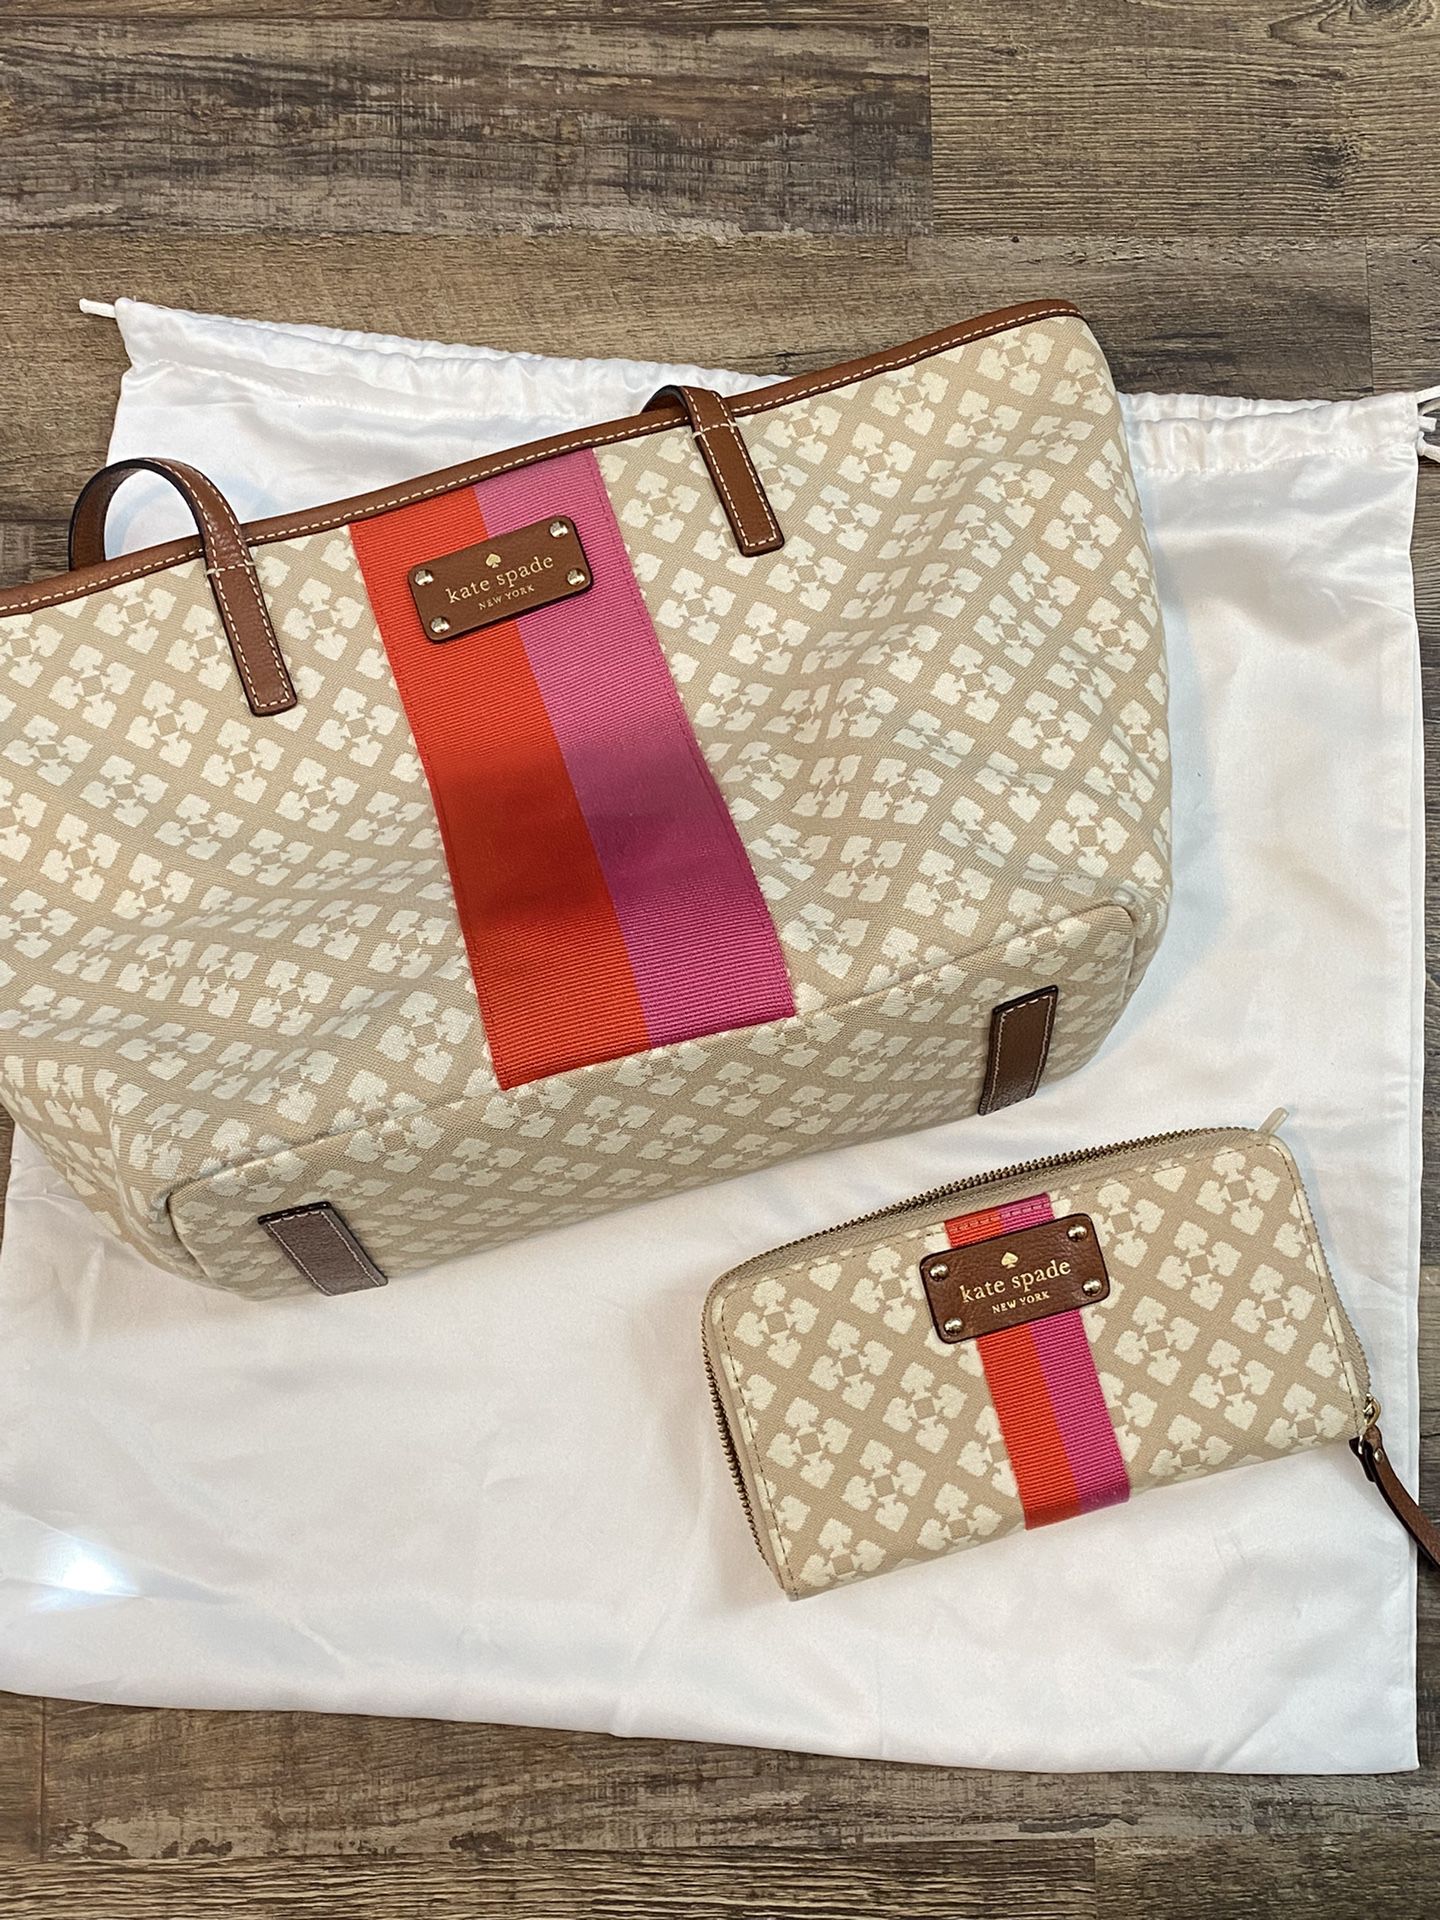 Kate Spade Purse With Matching Wallet